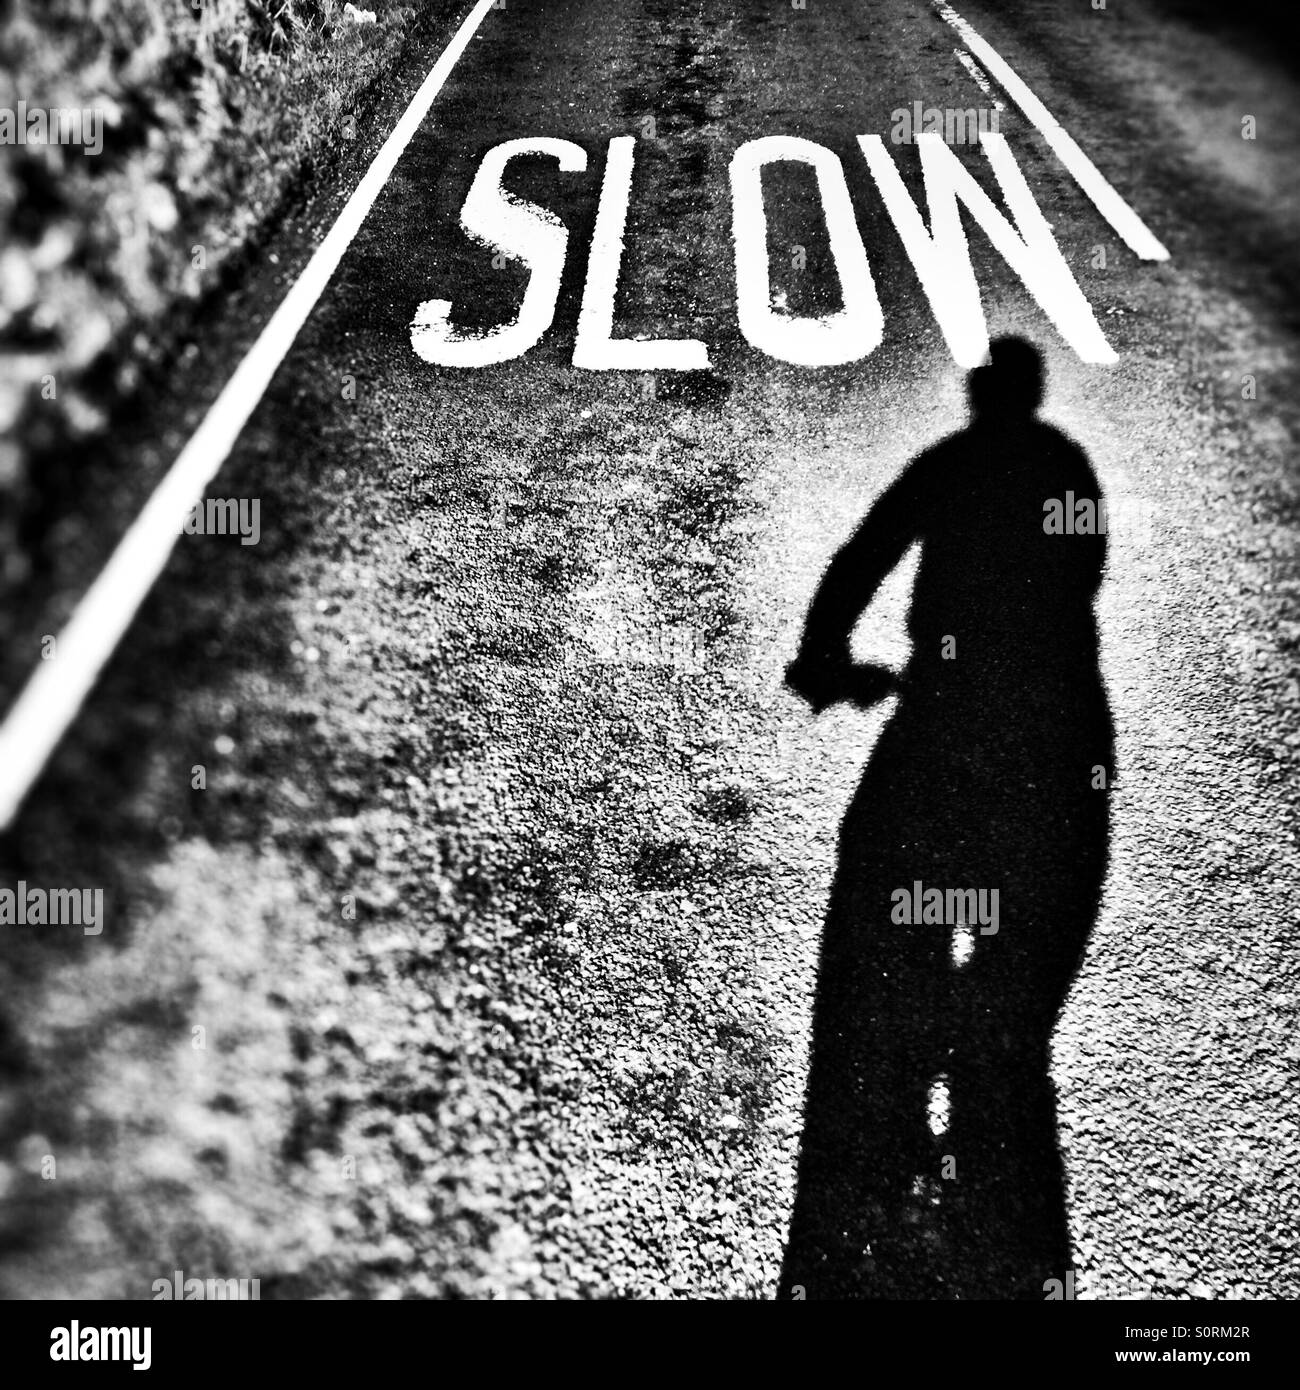 Slow sign on the road in front of cyclists shadow Selfie Stock Photo